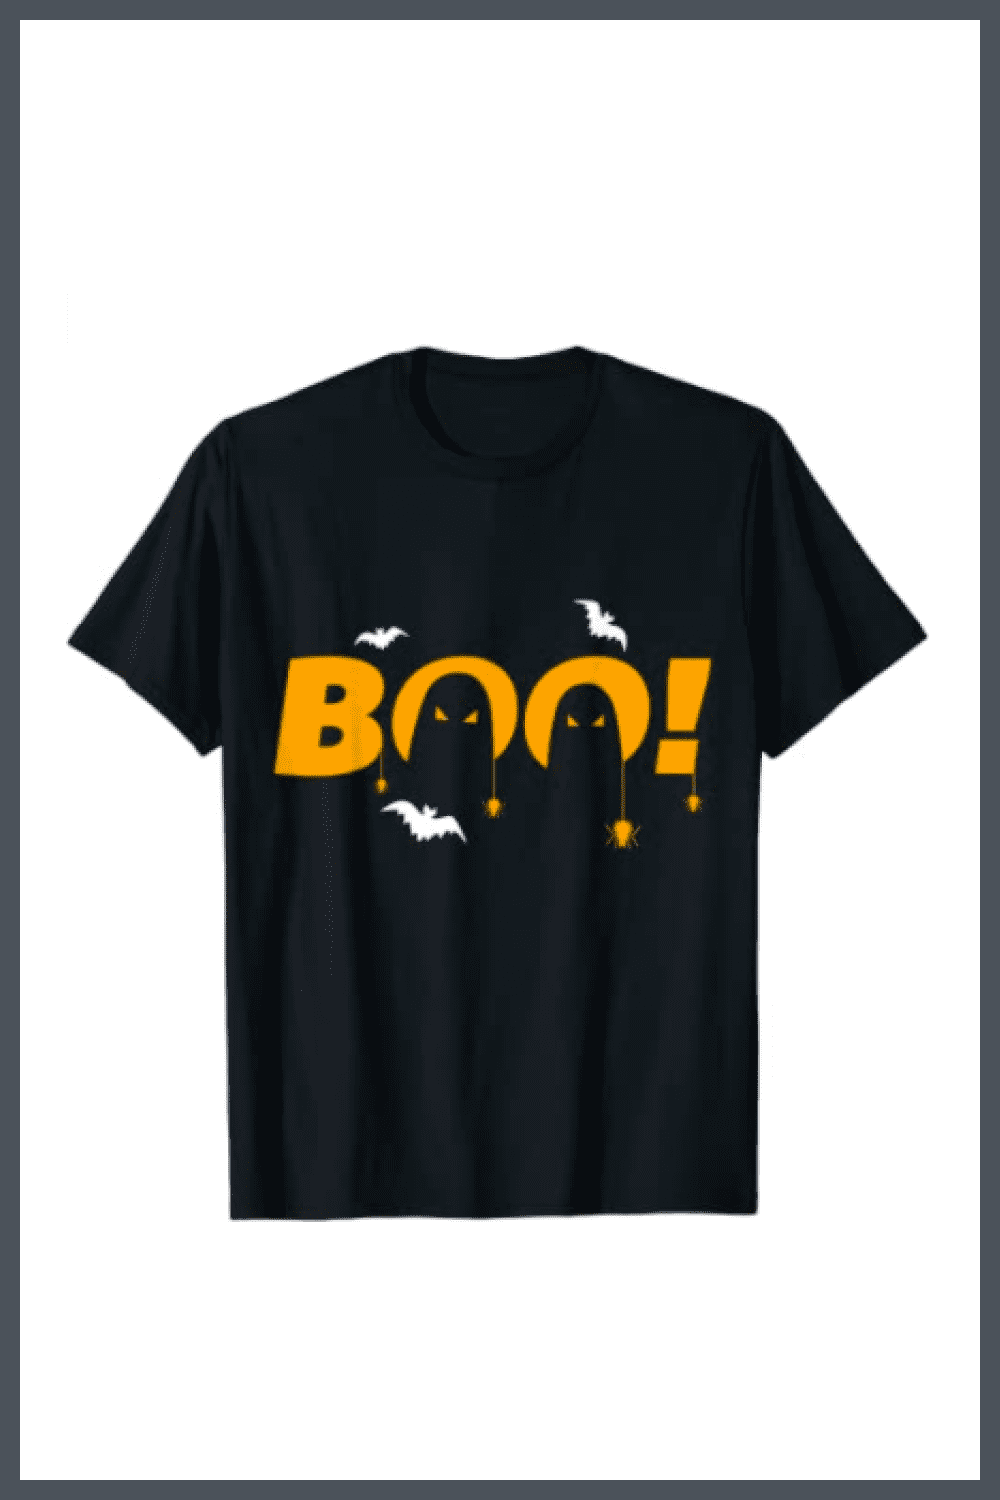 Font for Halloween t-shirts.